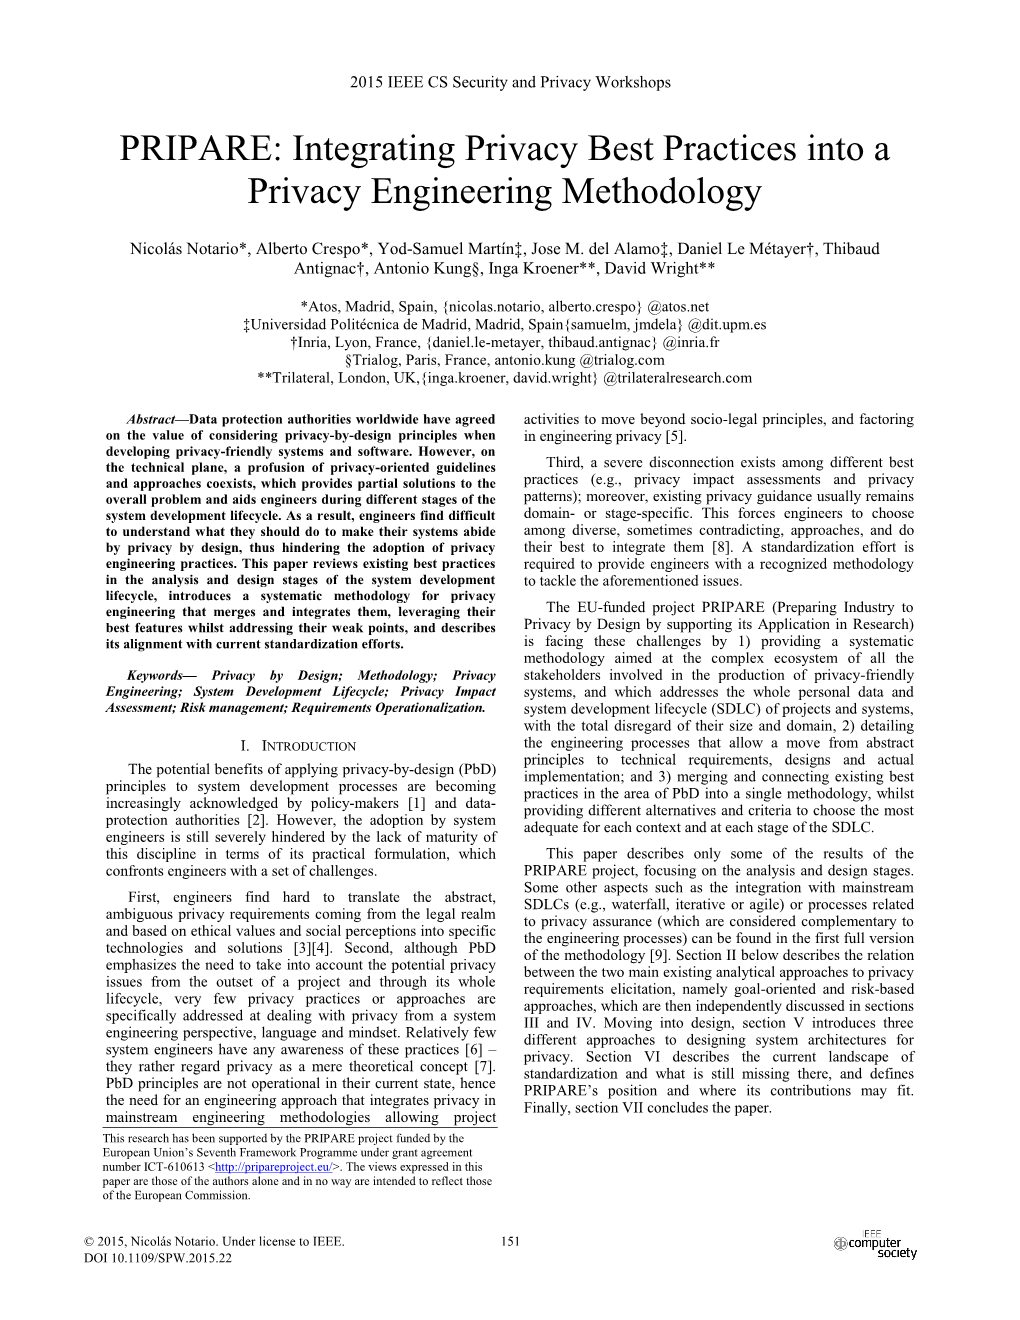 Integrating Privacy Best Practices Into a Privacy Engineering Methodology